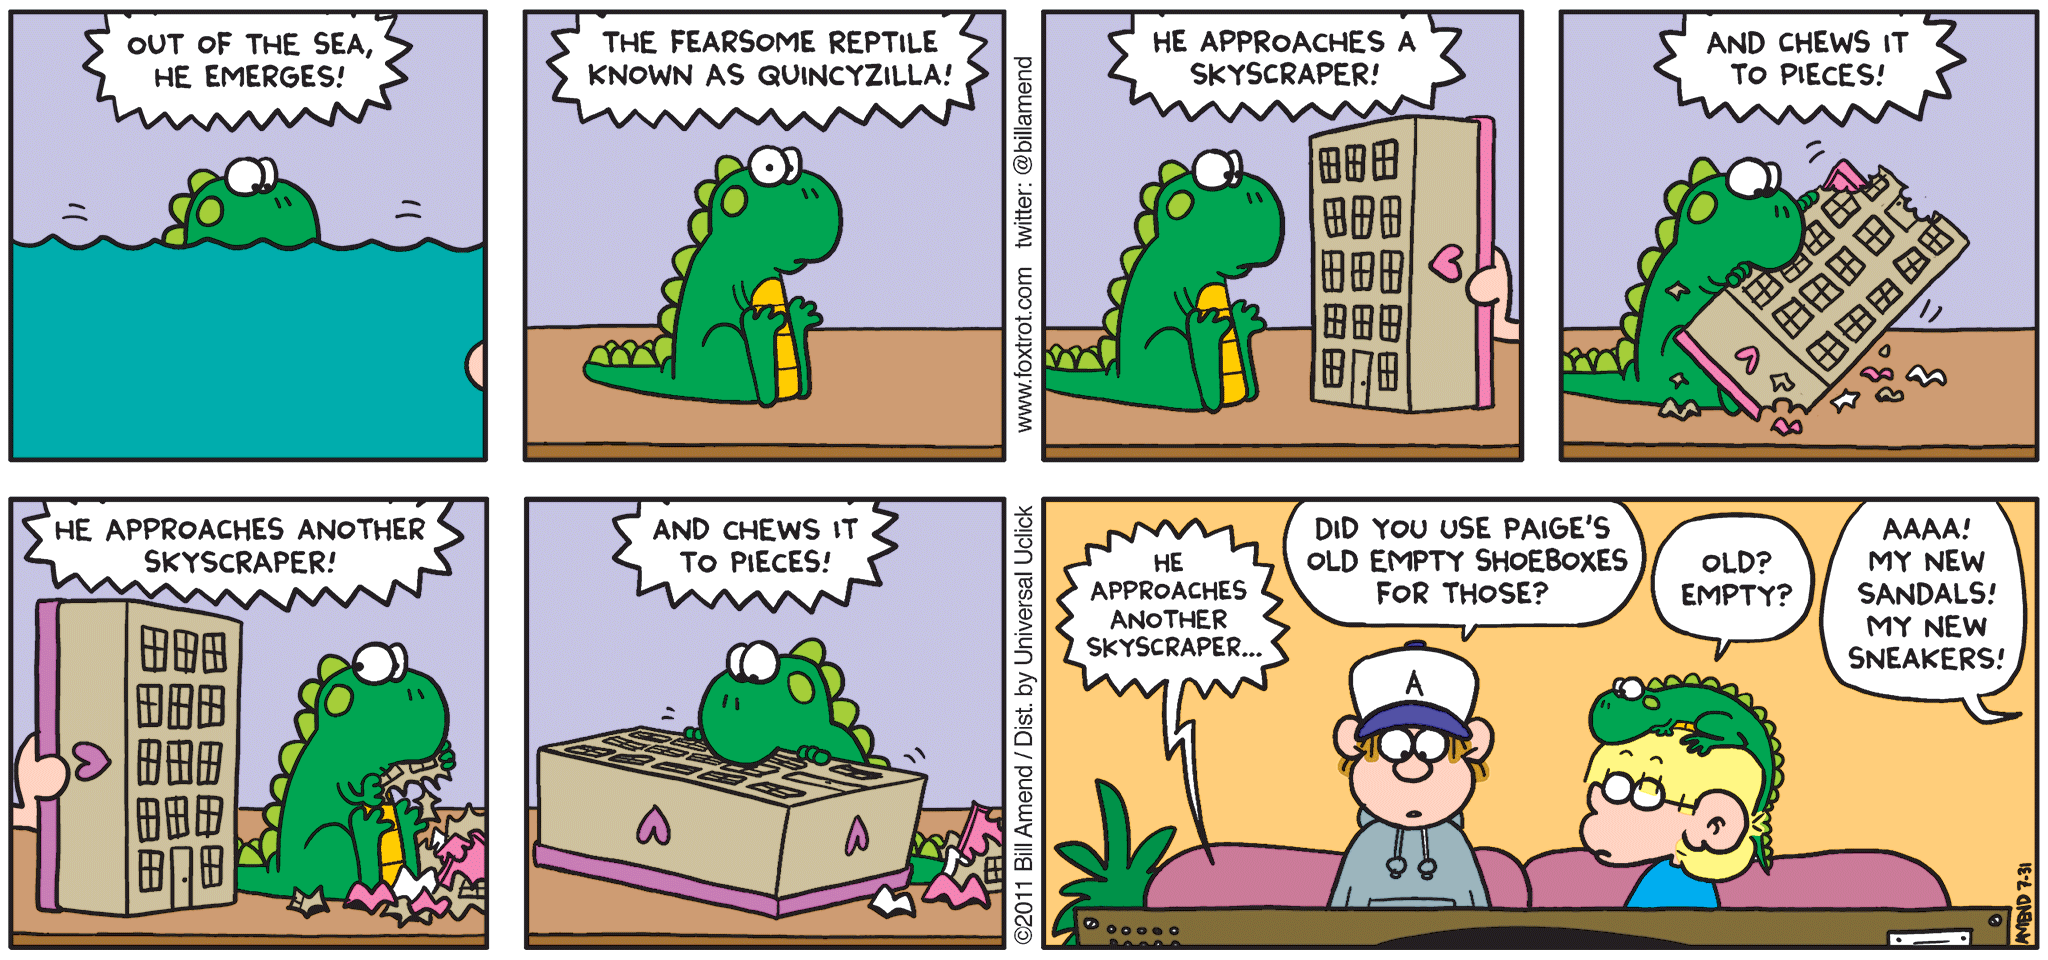 FoxTrot comic strip by Bill Amend - "Quincyzilla" published July 31, 2011 - TV: Out of the sea, he emerges! The fearsome reptile known as Quincyzilla! He approaches a skyscraper! And chews it to pieces! He approaches another skyscraper! And chews it to pieces! He approaches another skyscraper... Peter: Did you use Paige's old empty shoeboxes for those? Jason: Old? Empty? Paige: Aaaa! My new sandals! My new sneakers!